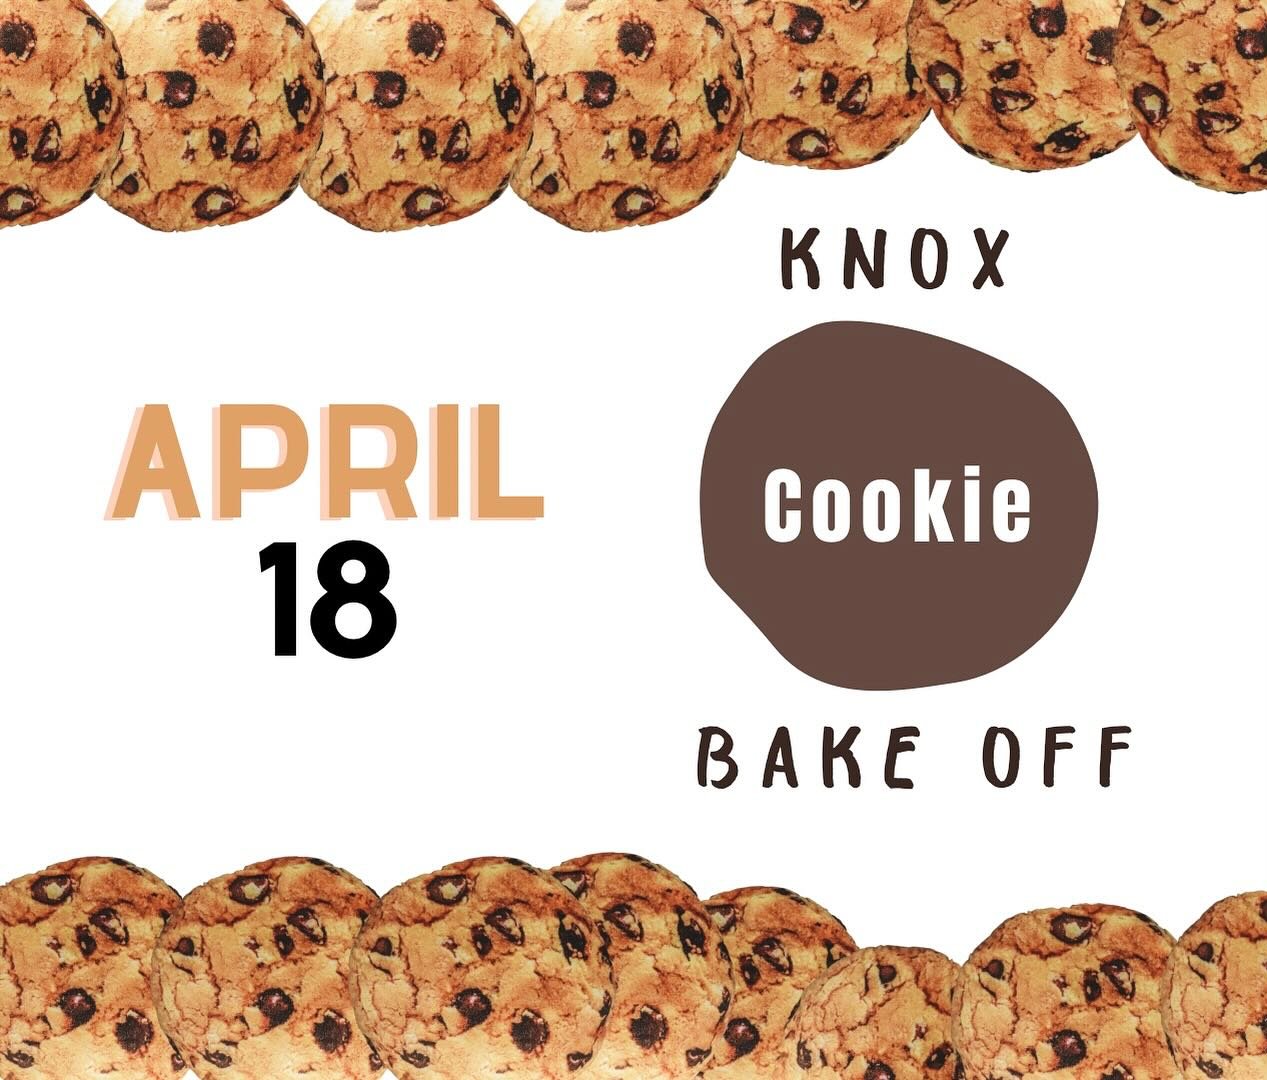 Ohhhhhhh yeah it&rsquo;s time for a bake-off! Bring your tastiest treat on Thursday night for a sweet time! Details in the ENews.